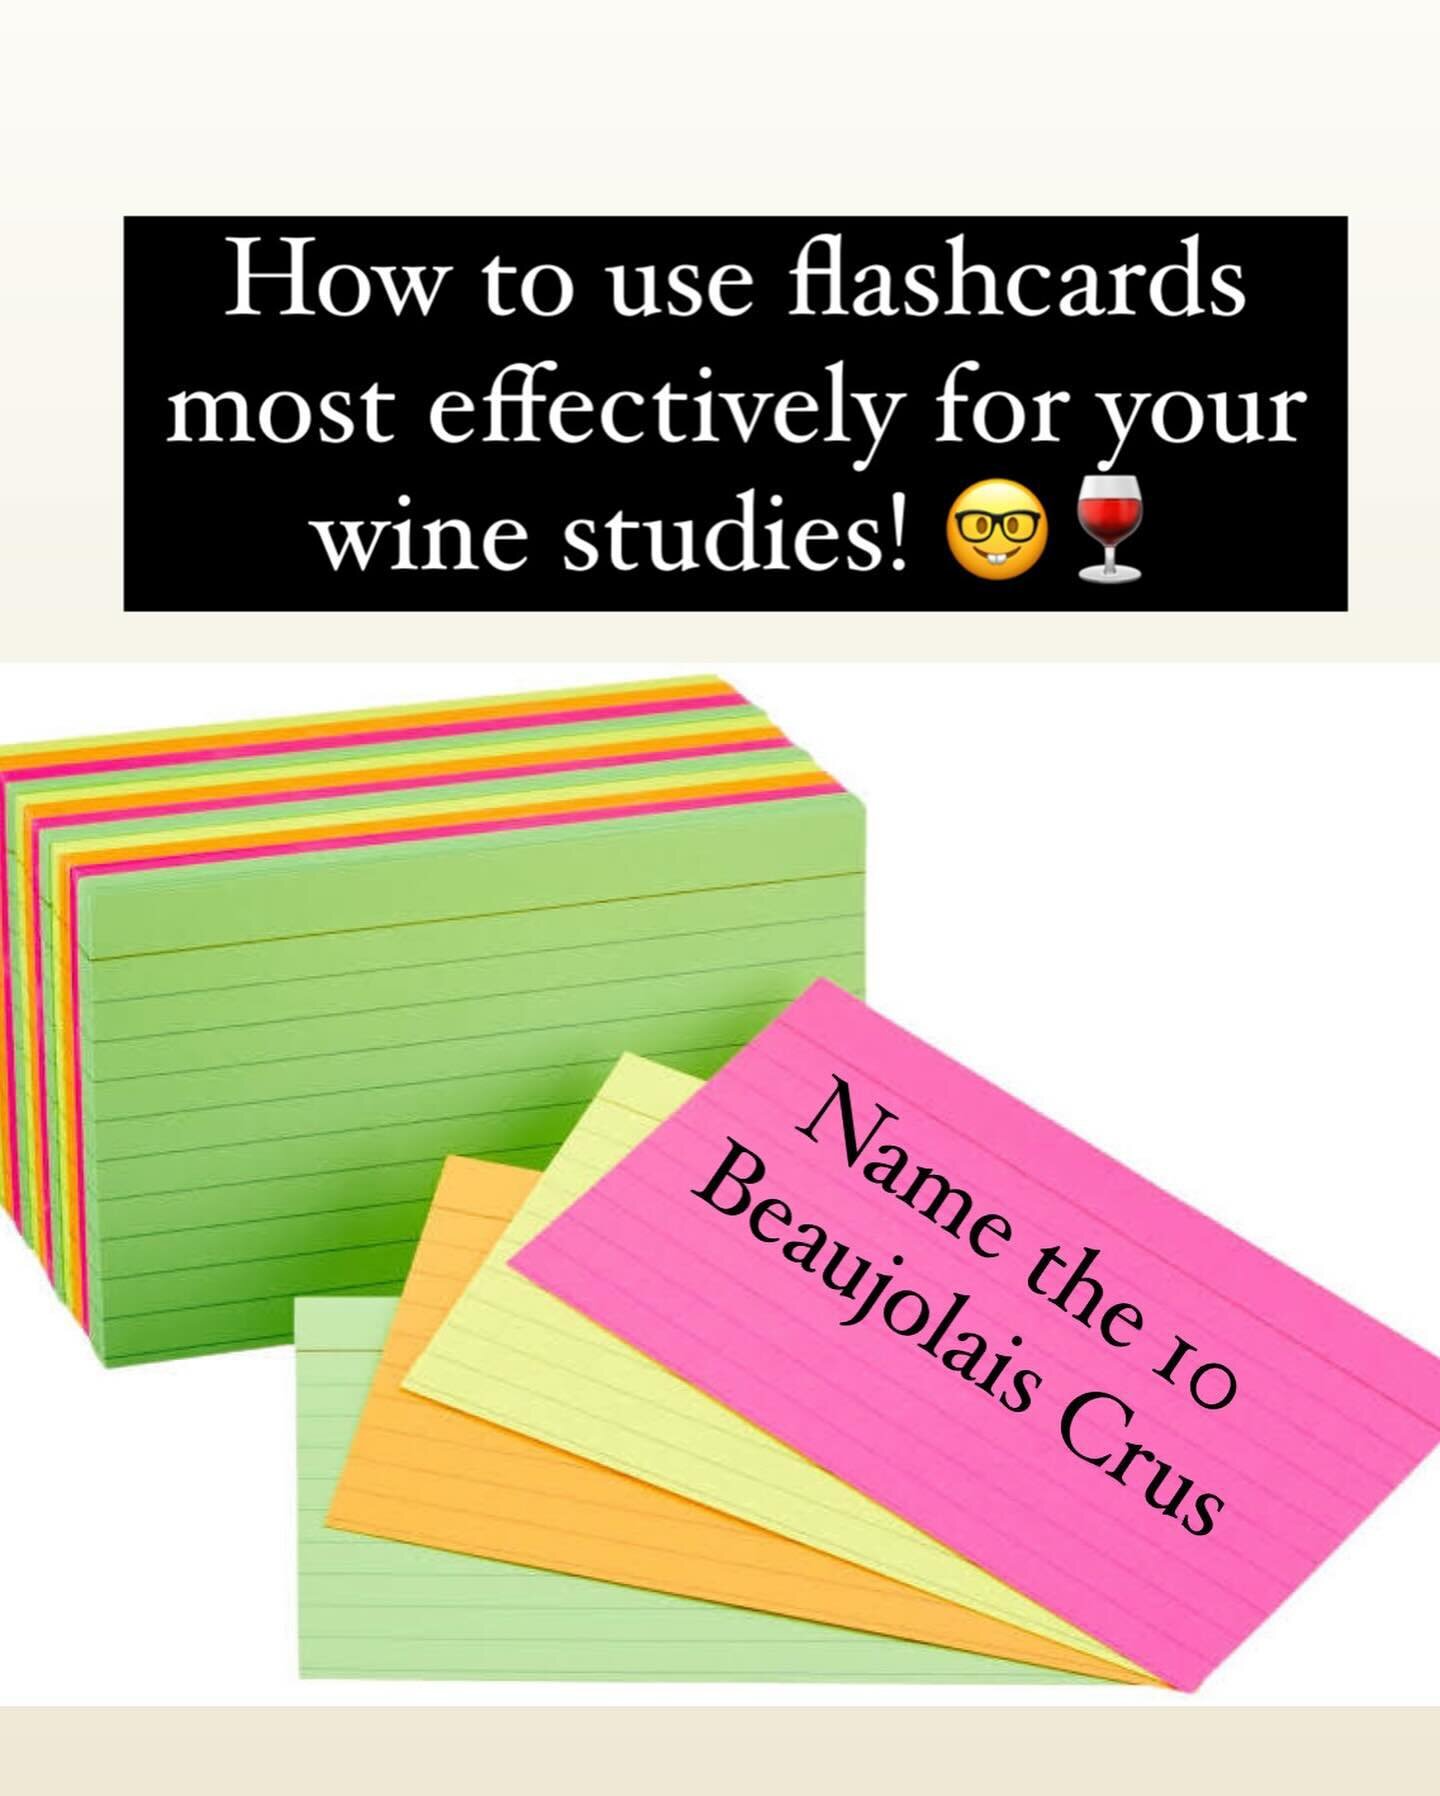 Flashcards are a common study method for wine students. Here are 4 tips for how to use this popular study tool more effectively:
 
1 &ndash; Create Your Own. Putting the textbook into your OWN words is most effective for memory retention. Using pre-p